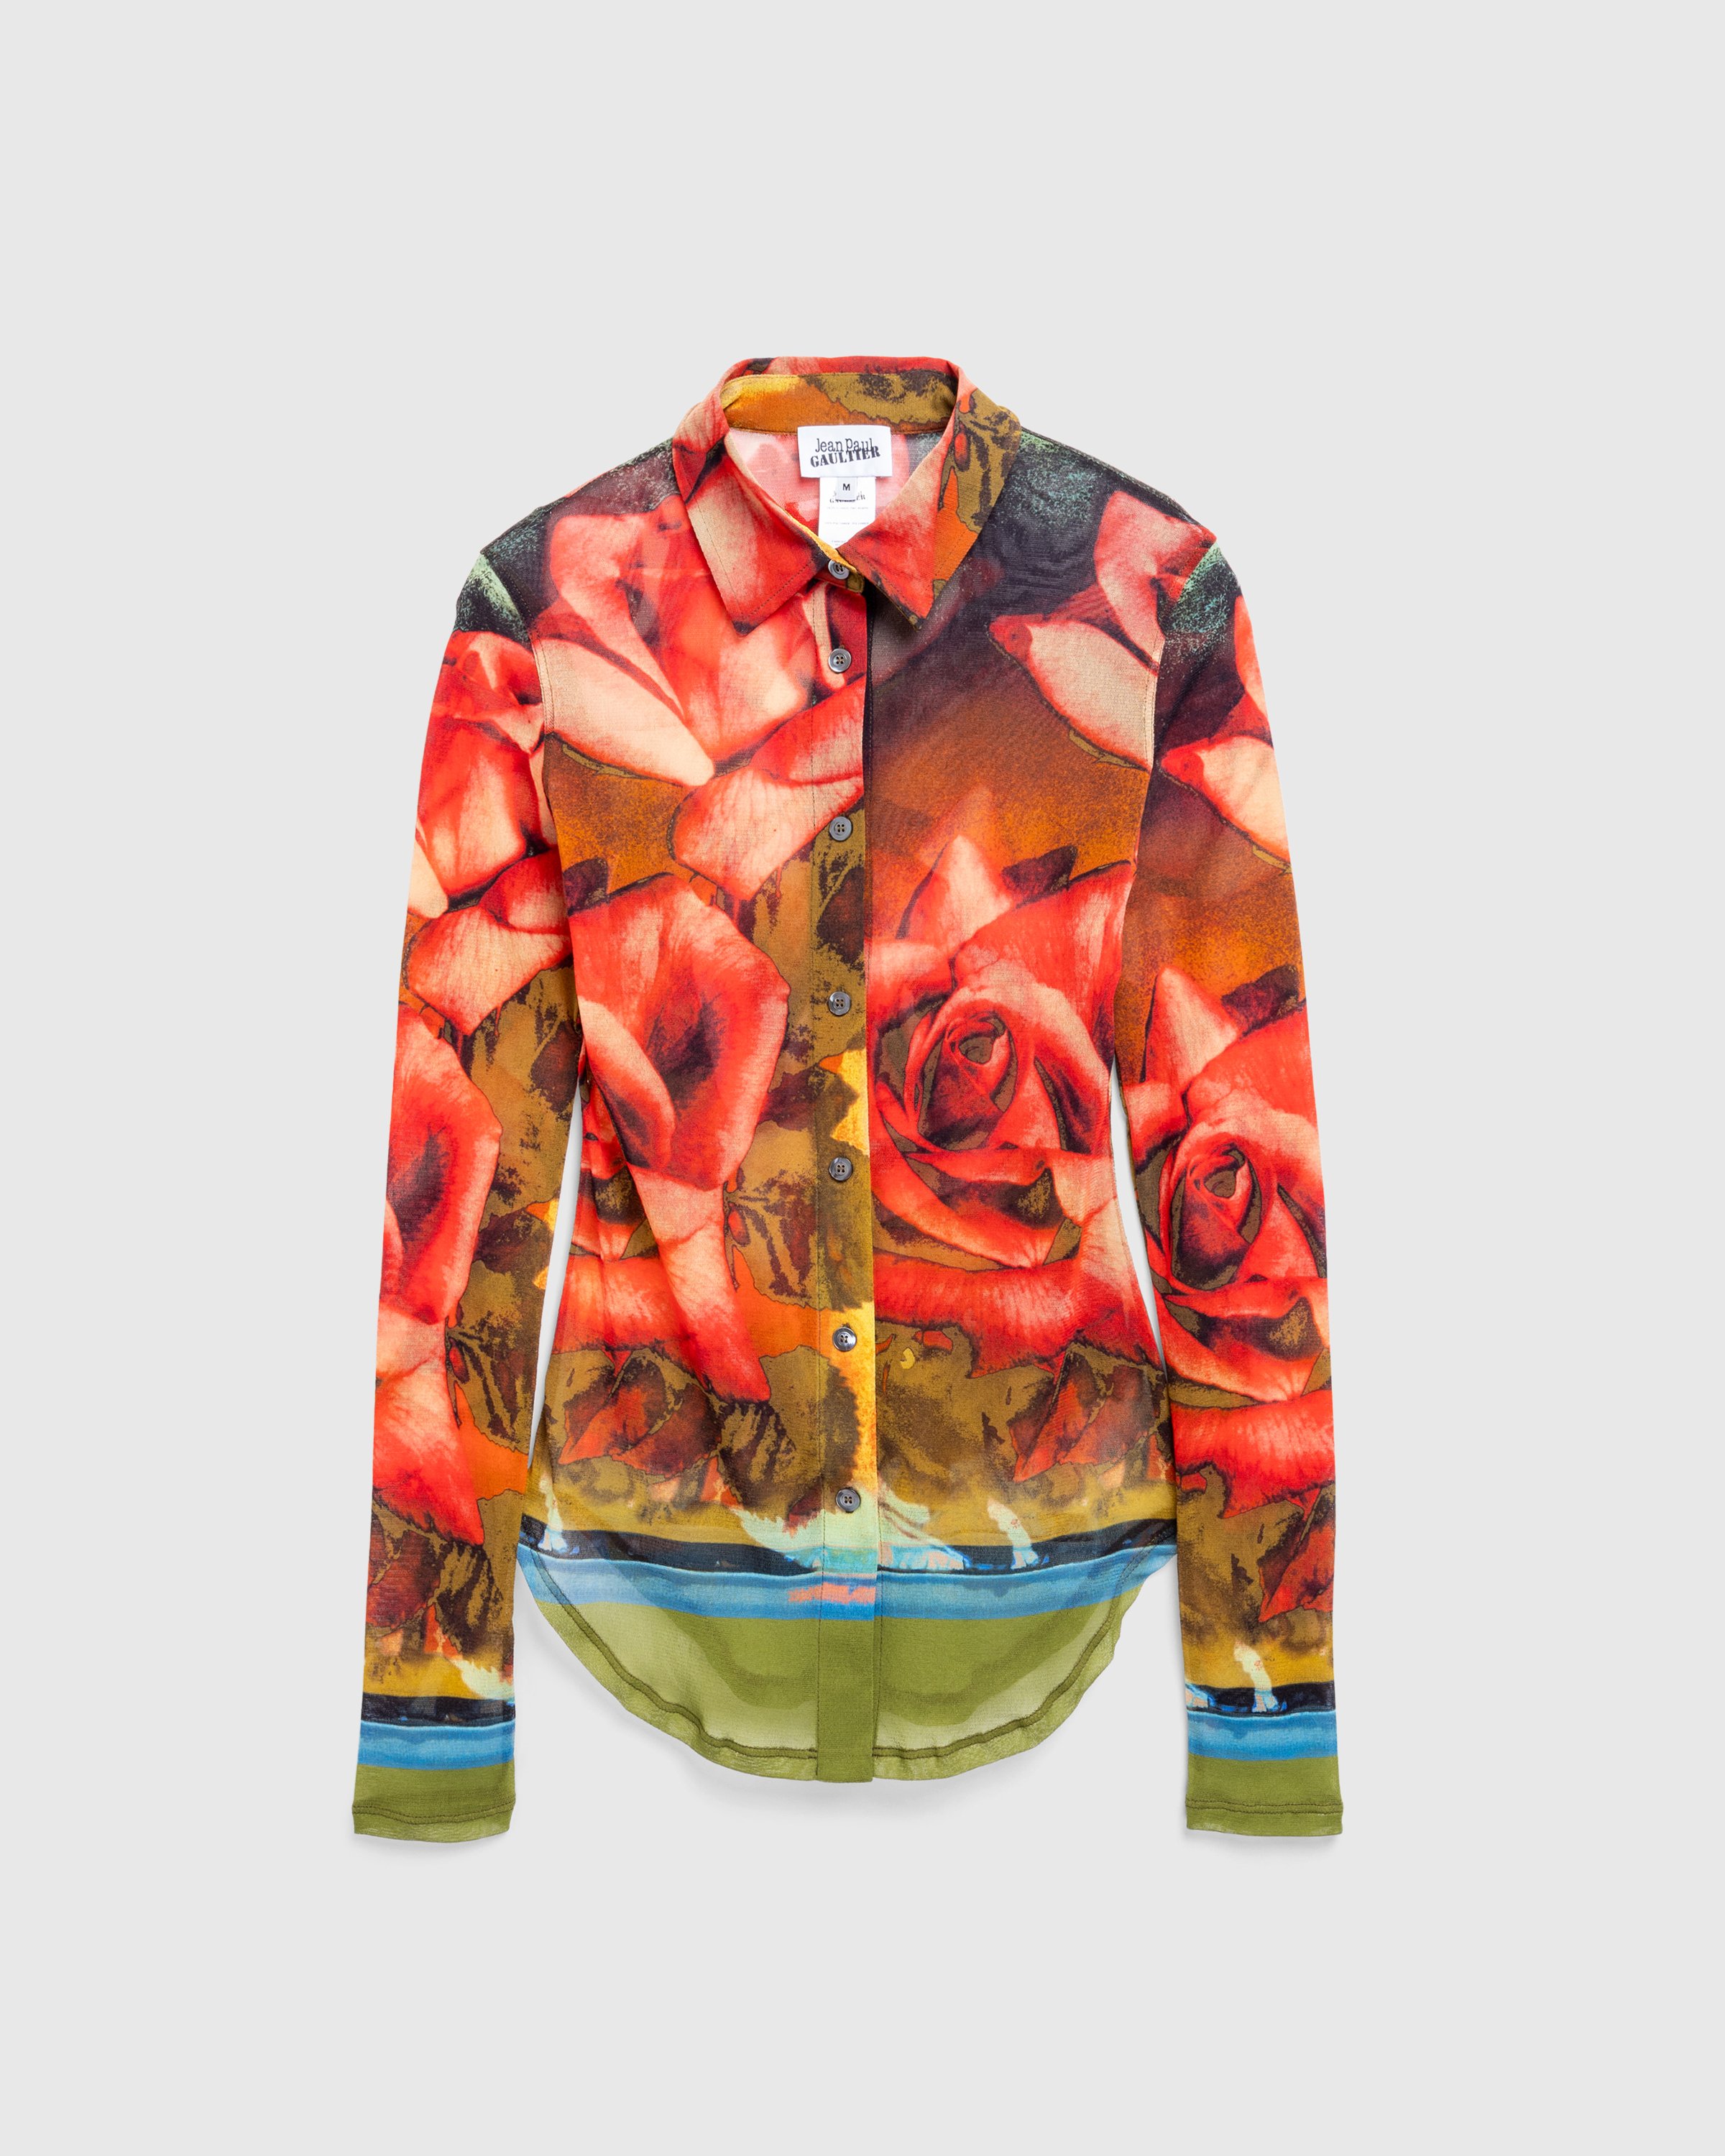 Jean Paul Gaultier - Mesh Long Sleeves Shirt Printed Roses Green/Red/Blue - Clothing - Multi - Image 1